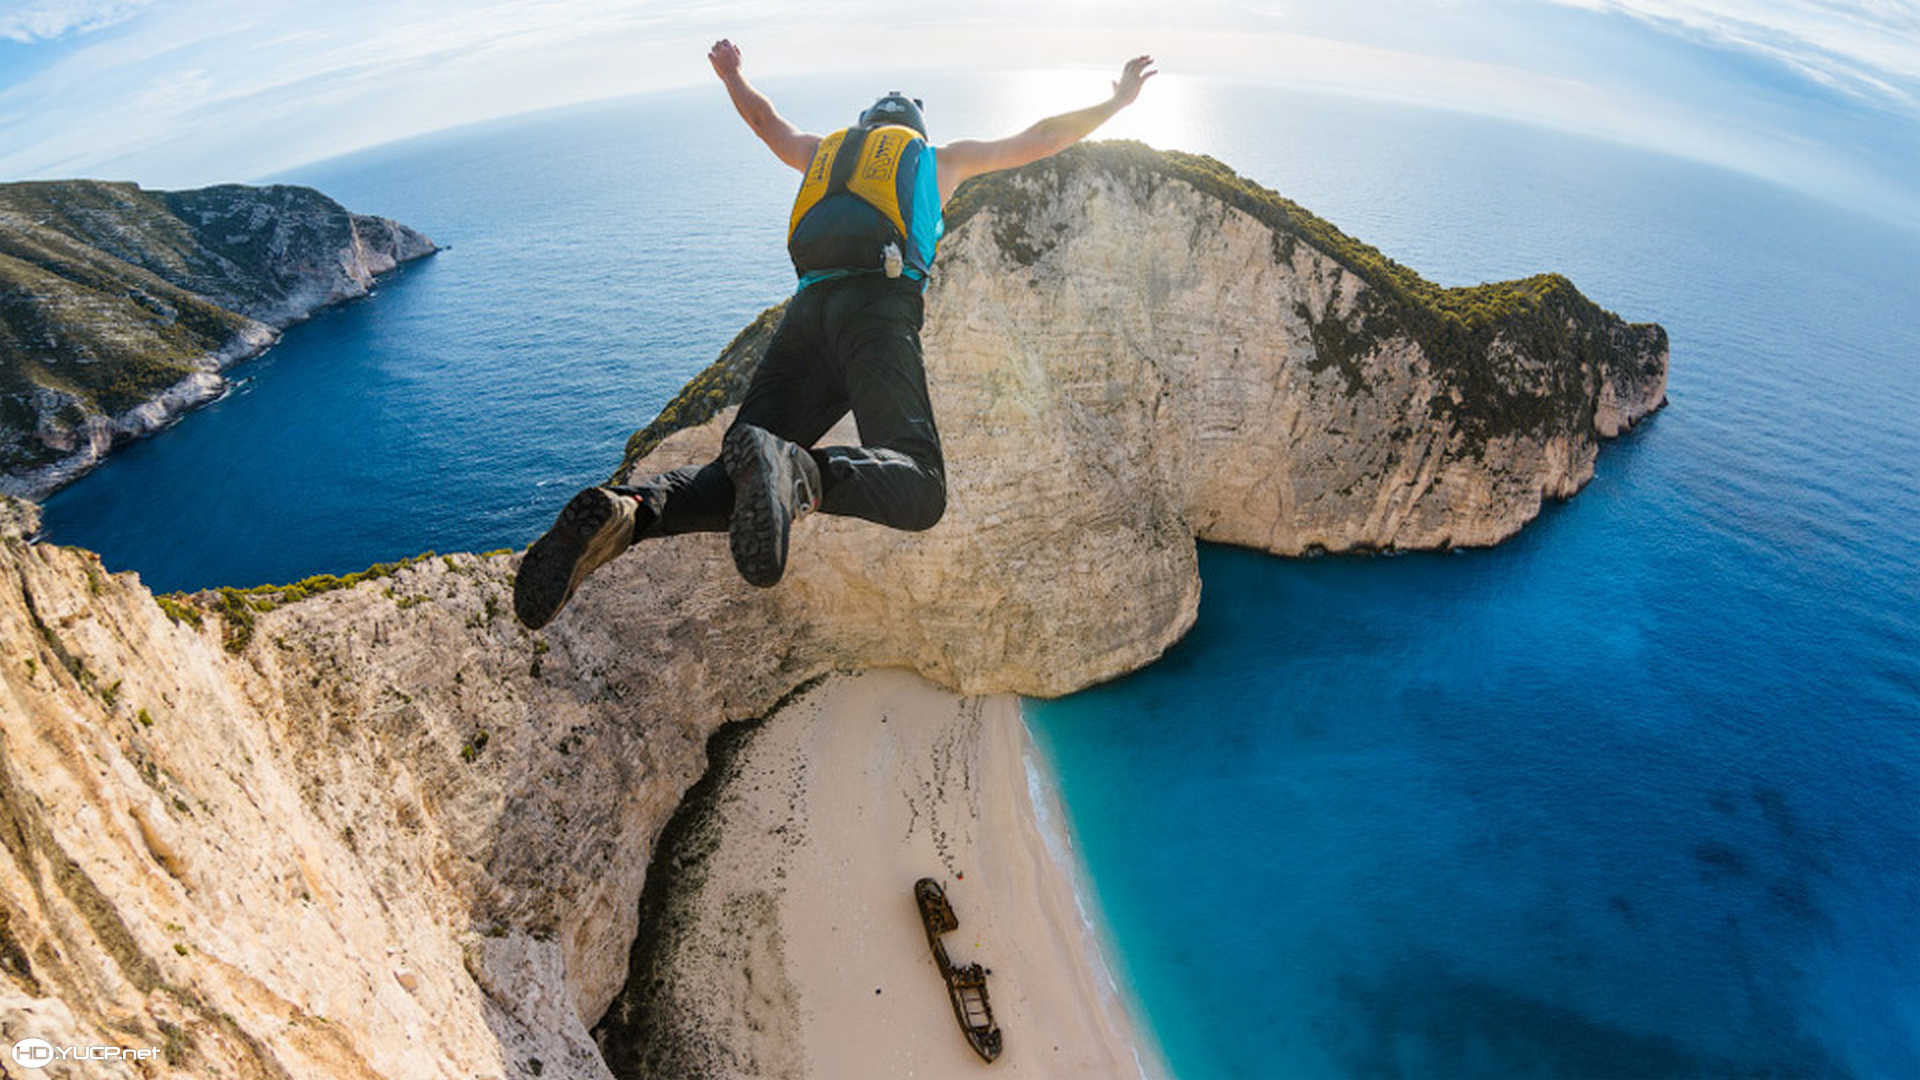 BASE Jumping: Adventure air sport, Recreational sport, Extreme jump at much lower altitudes. 1920x1080 Full HD Wallpaper.